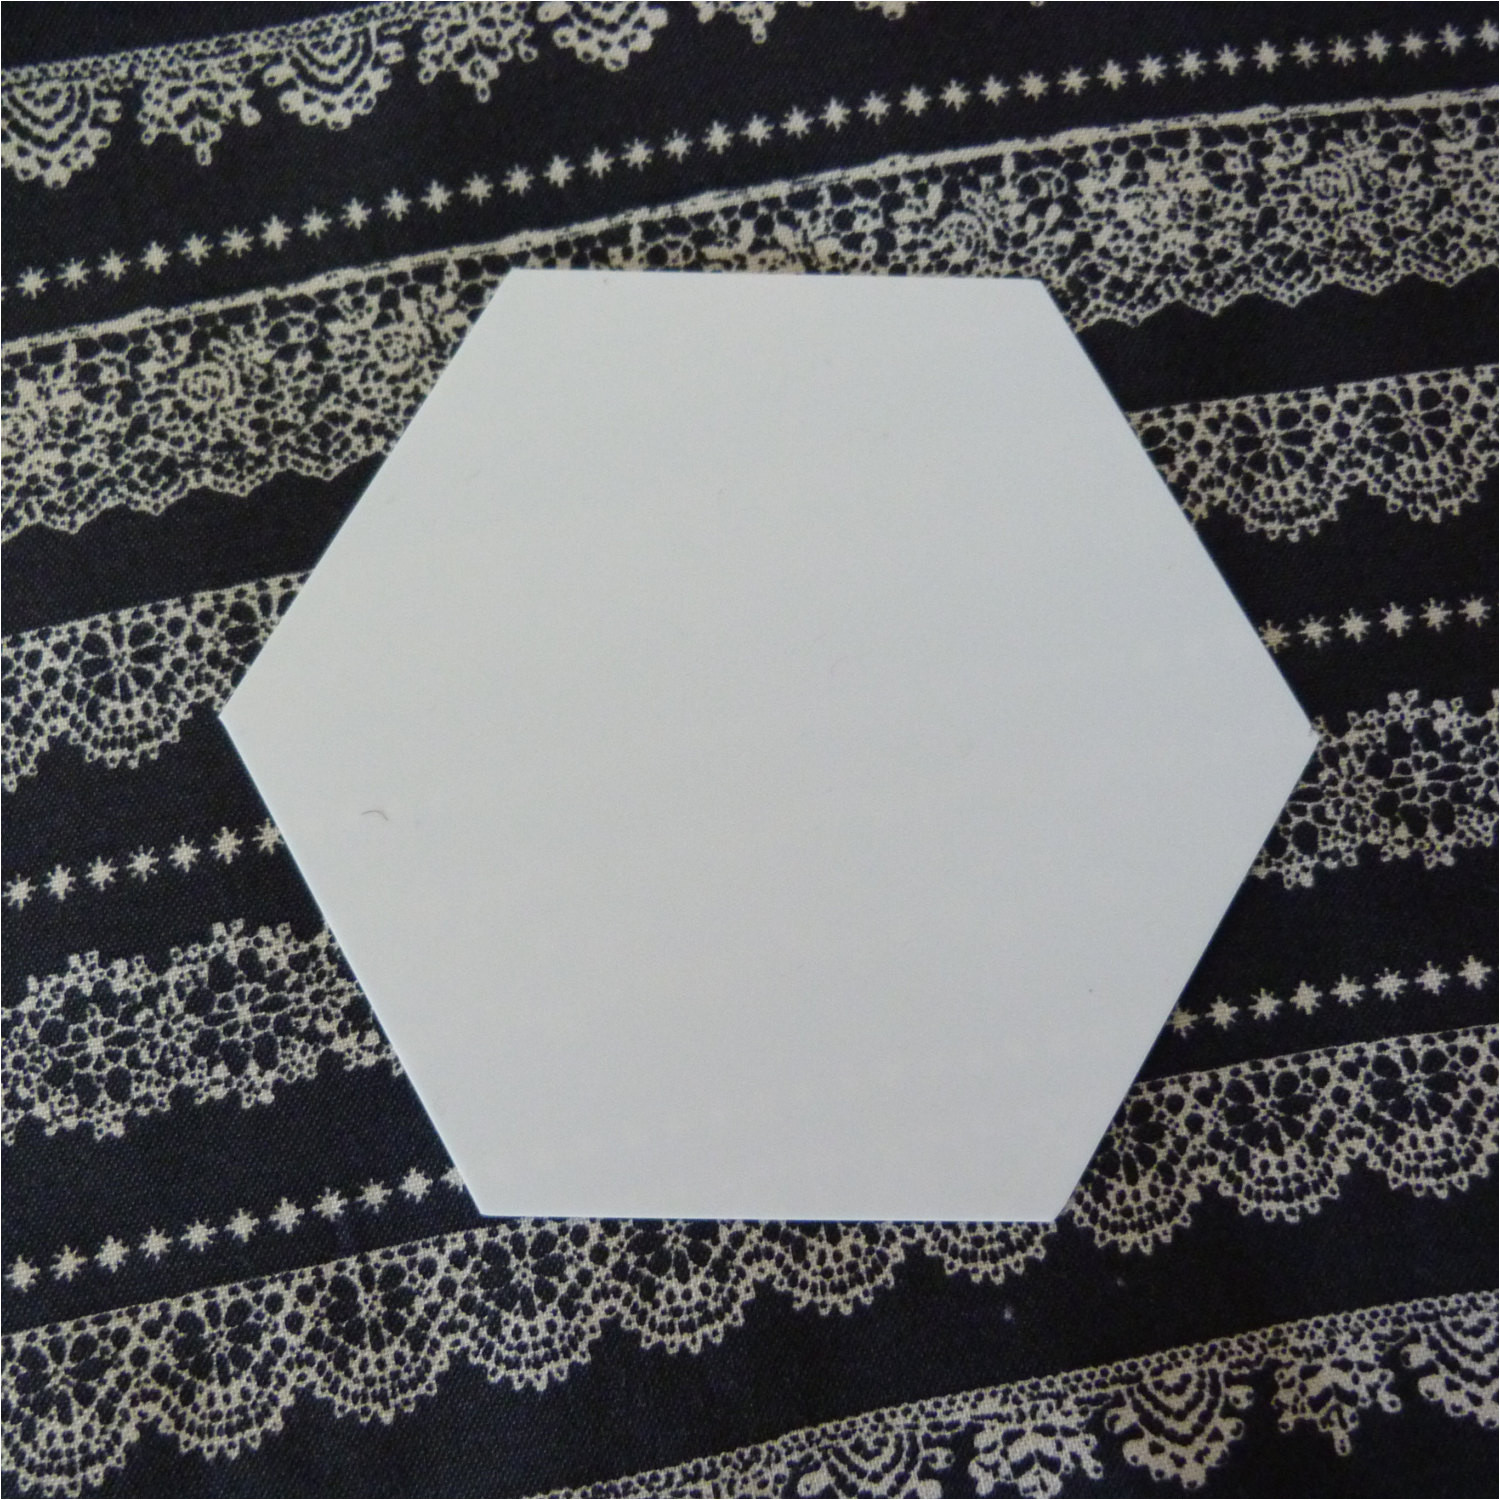 Hexagon Quilt Template Plastic Plastic Hexagon Quilt Template for English Paper Piecing and